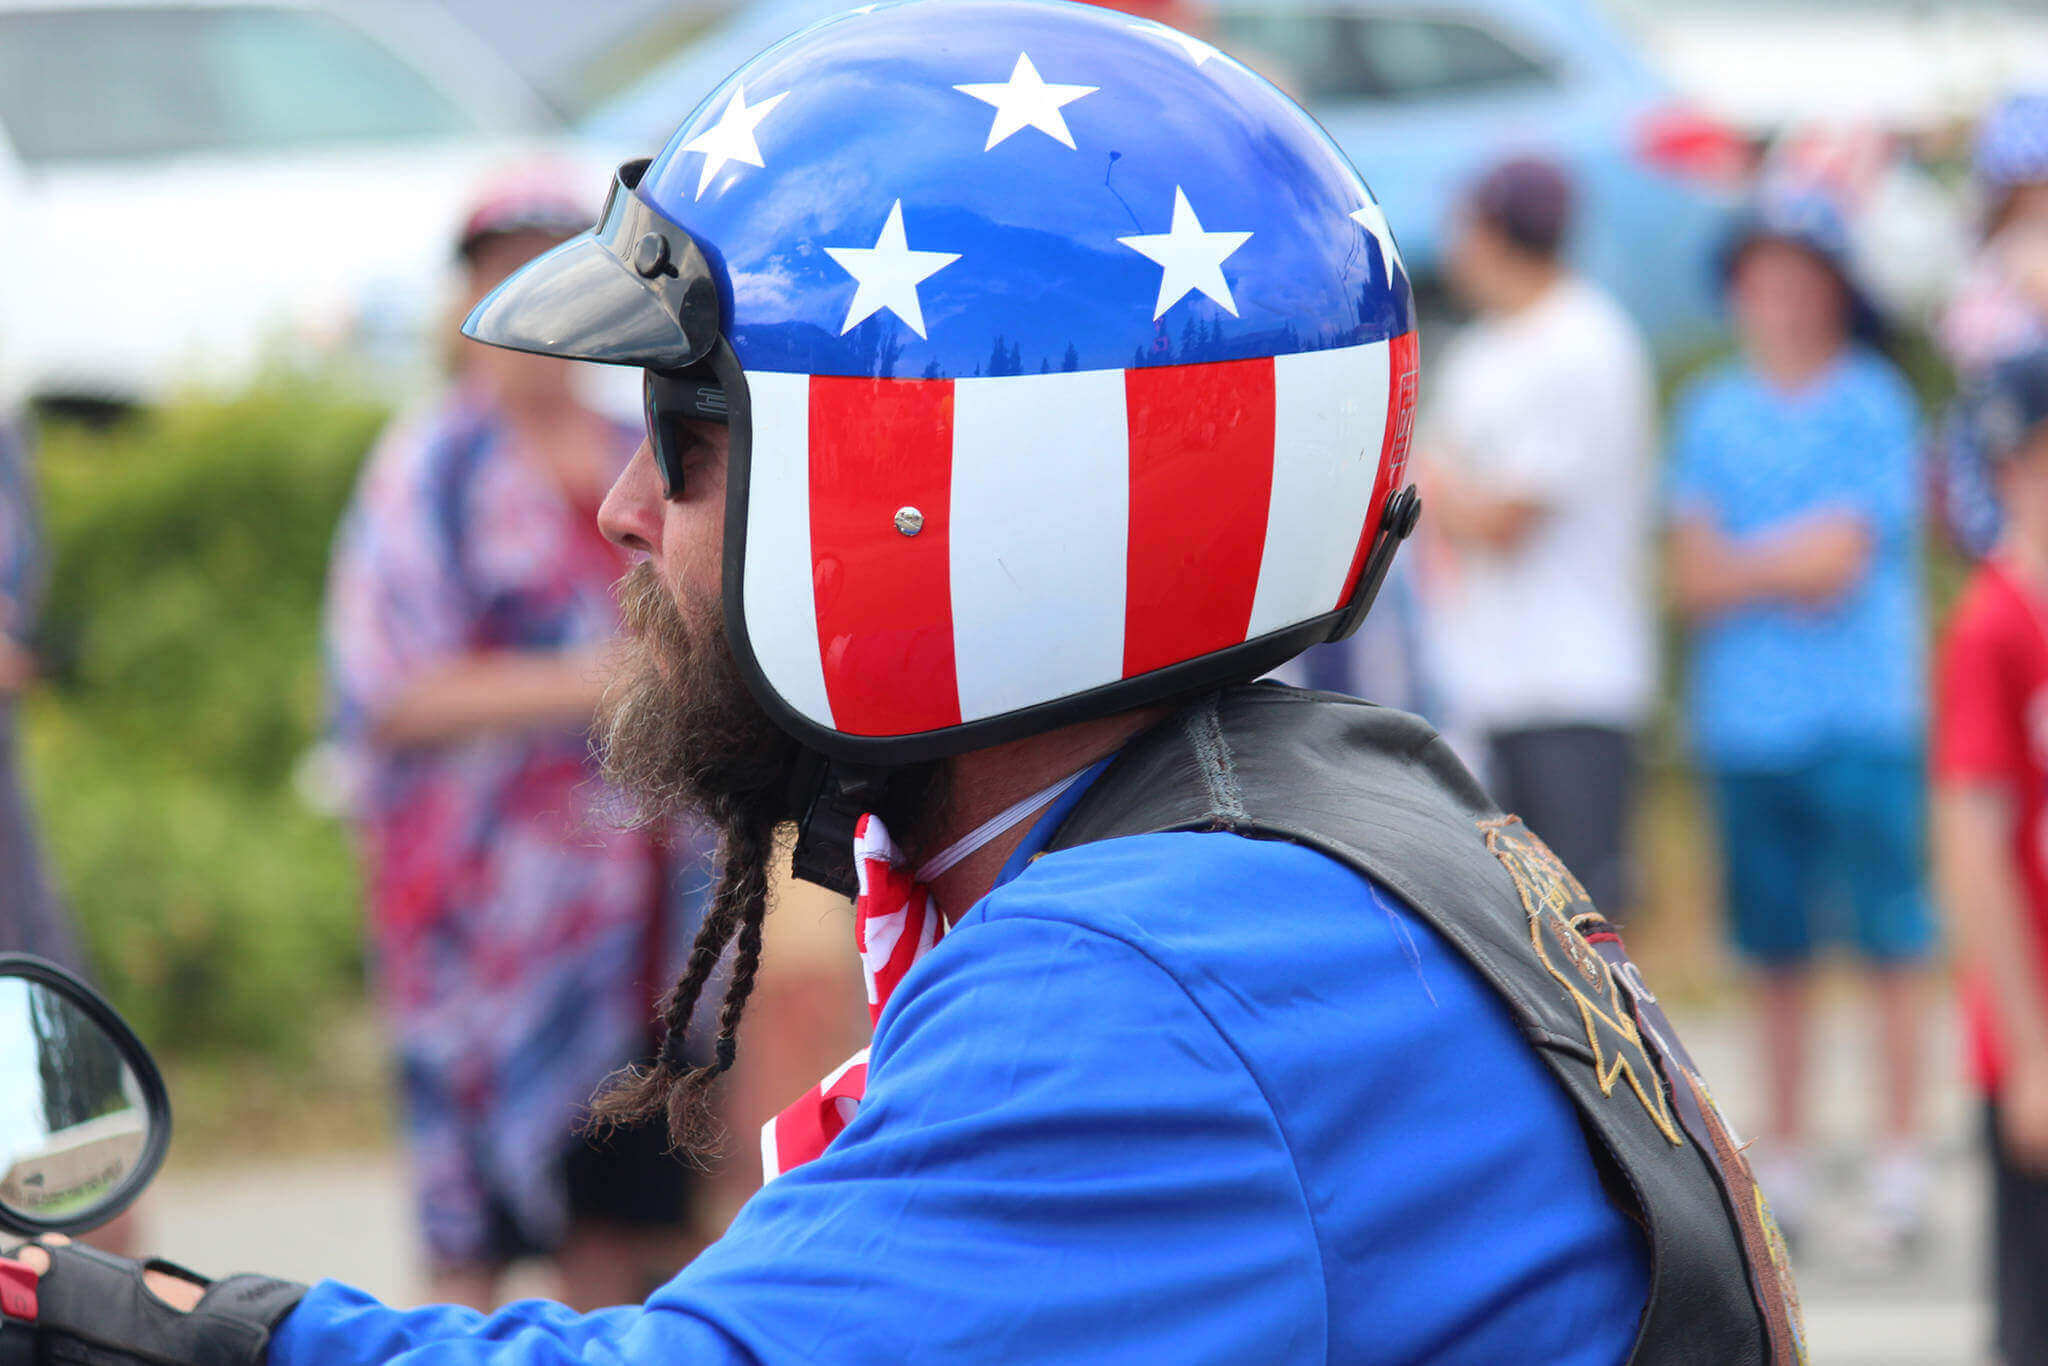 Motorcycle rider wearing the best patriotic helmet with American flag design, celebrating Fourth of July